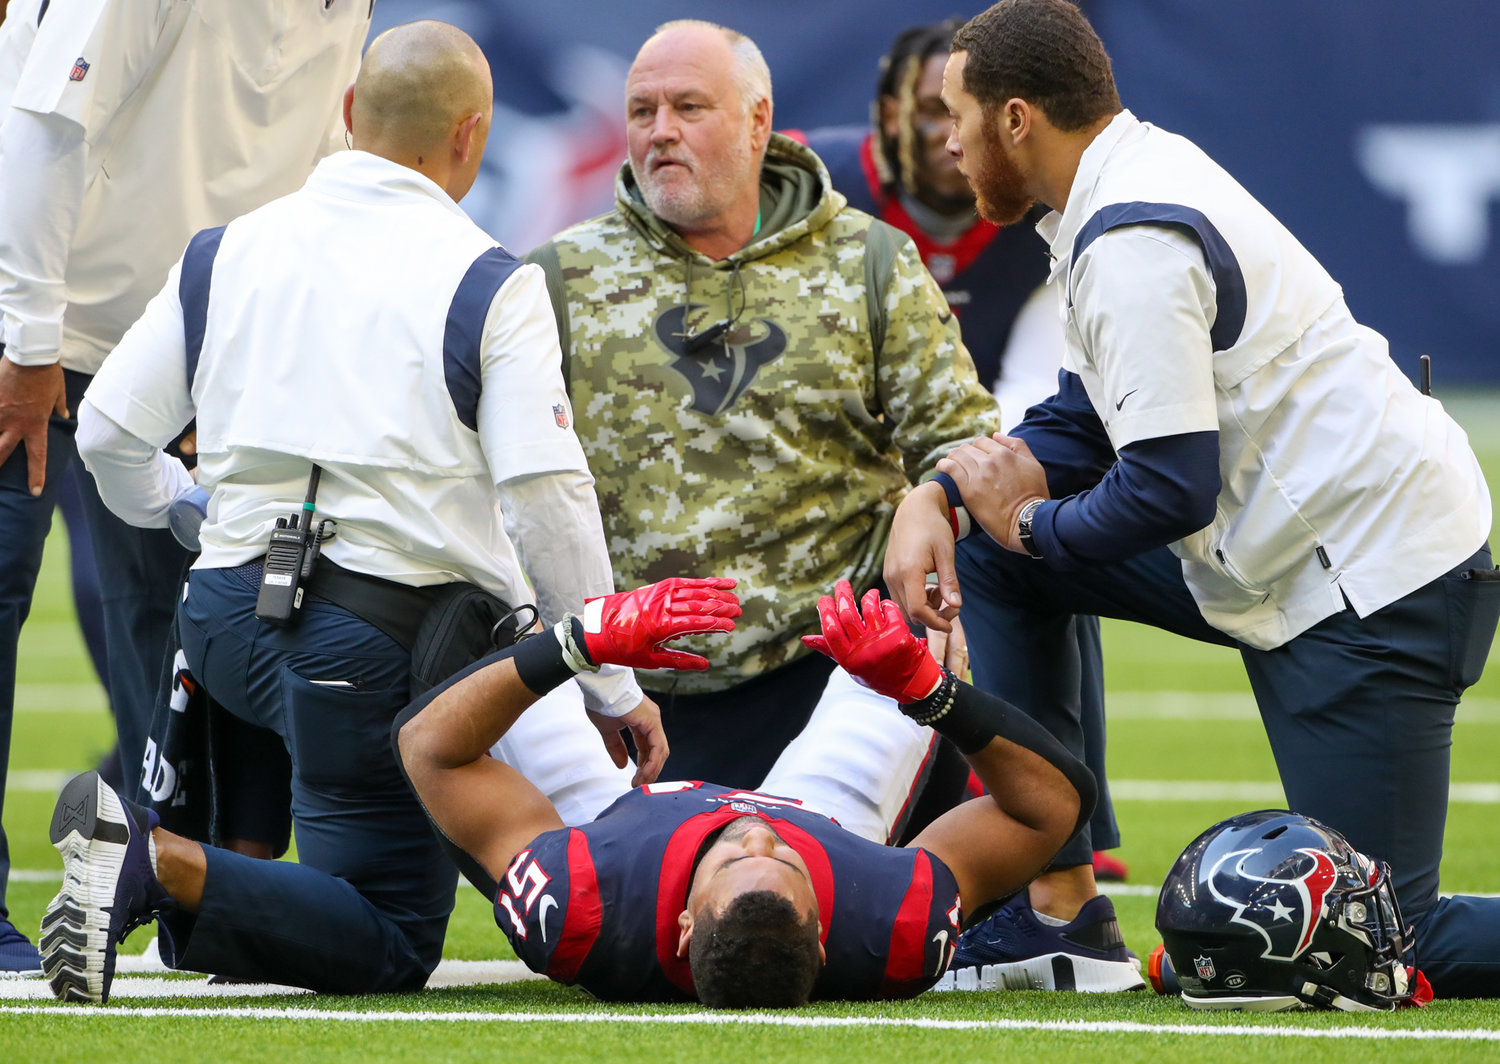 Trainers attend to Houston Texans linebacker Kamu Grugier-Hill (51) after an injury during the second half of an NFL game between the Seahawks and the Texans on December 12, 2021 in Houston, Texas.